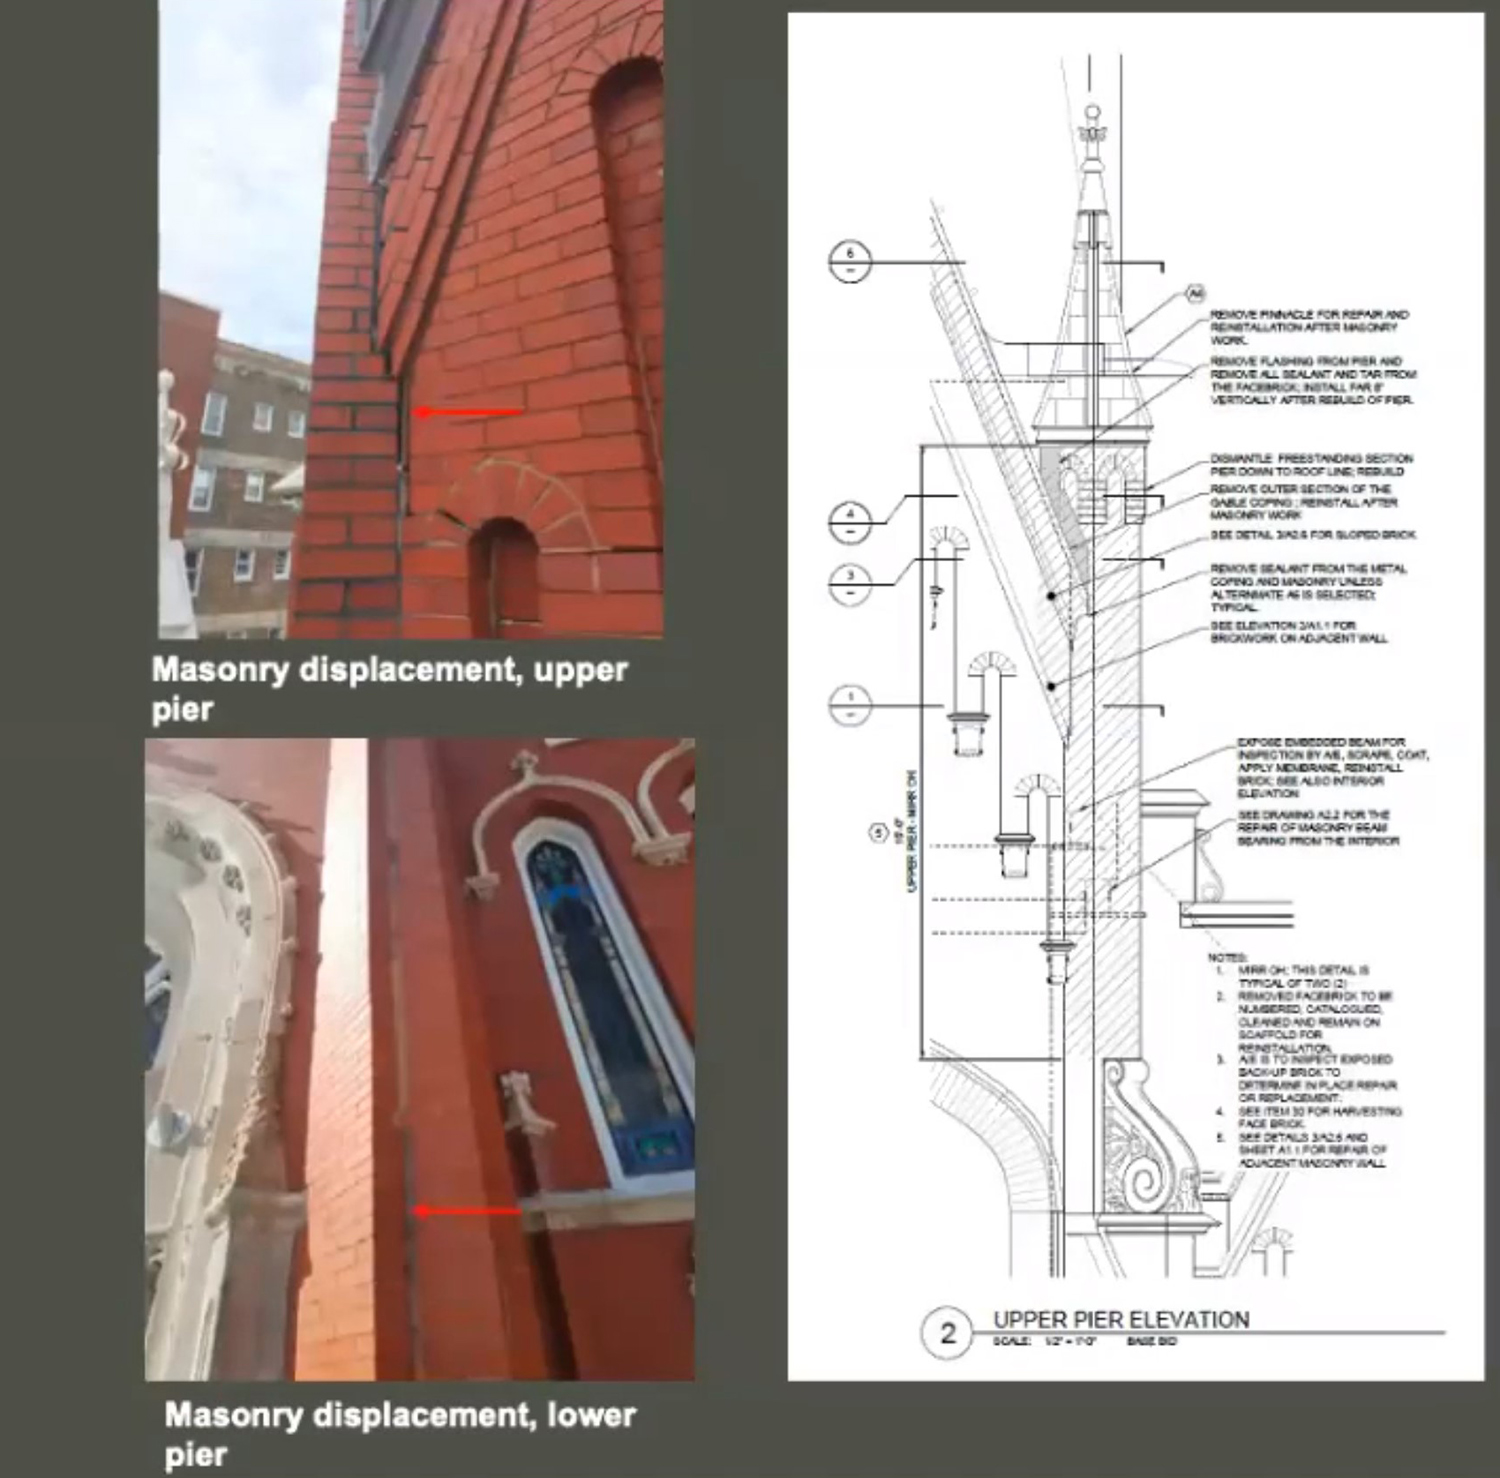 Masonry Displacement Conditions and Drawings. Drawings by Wauters Design